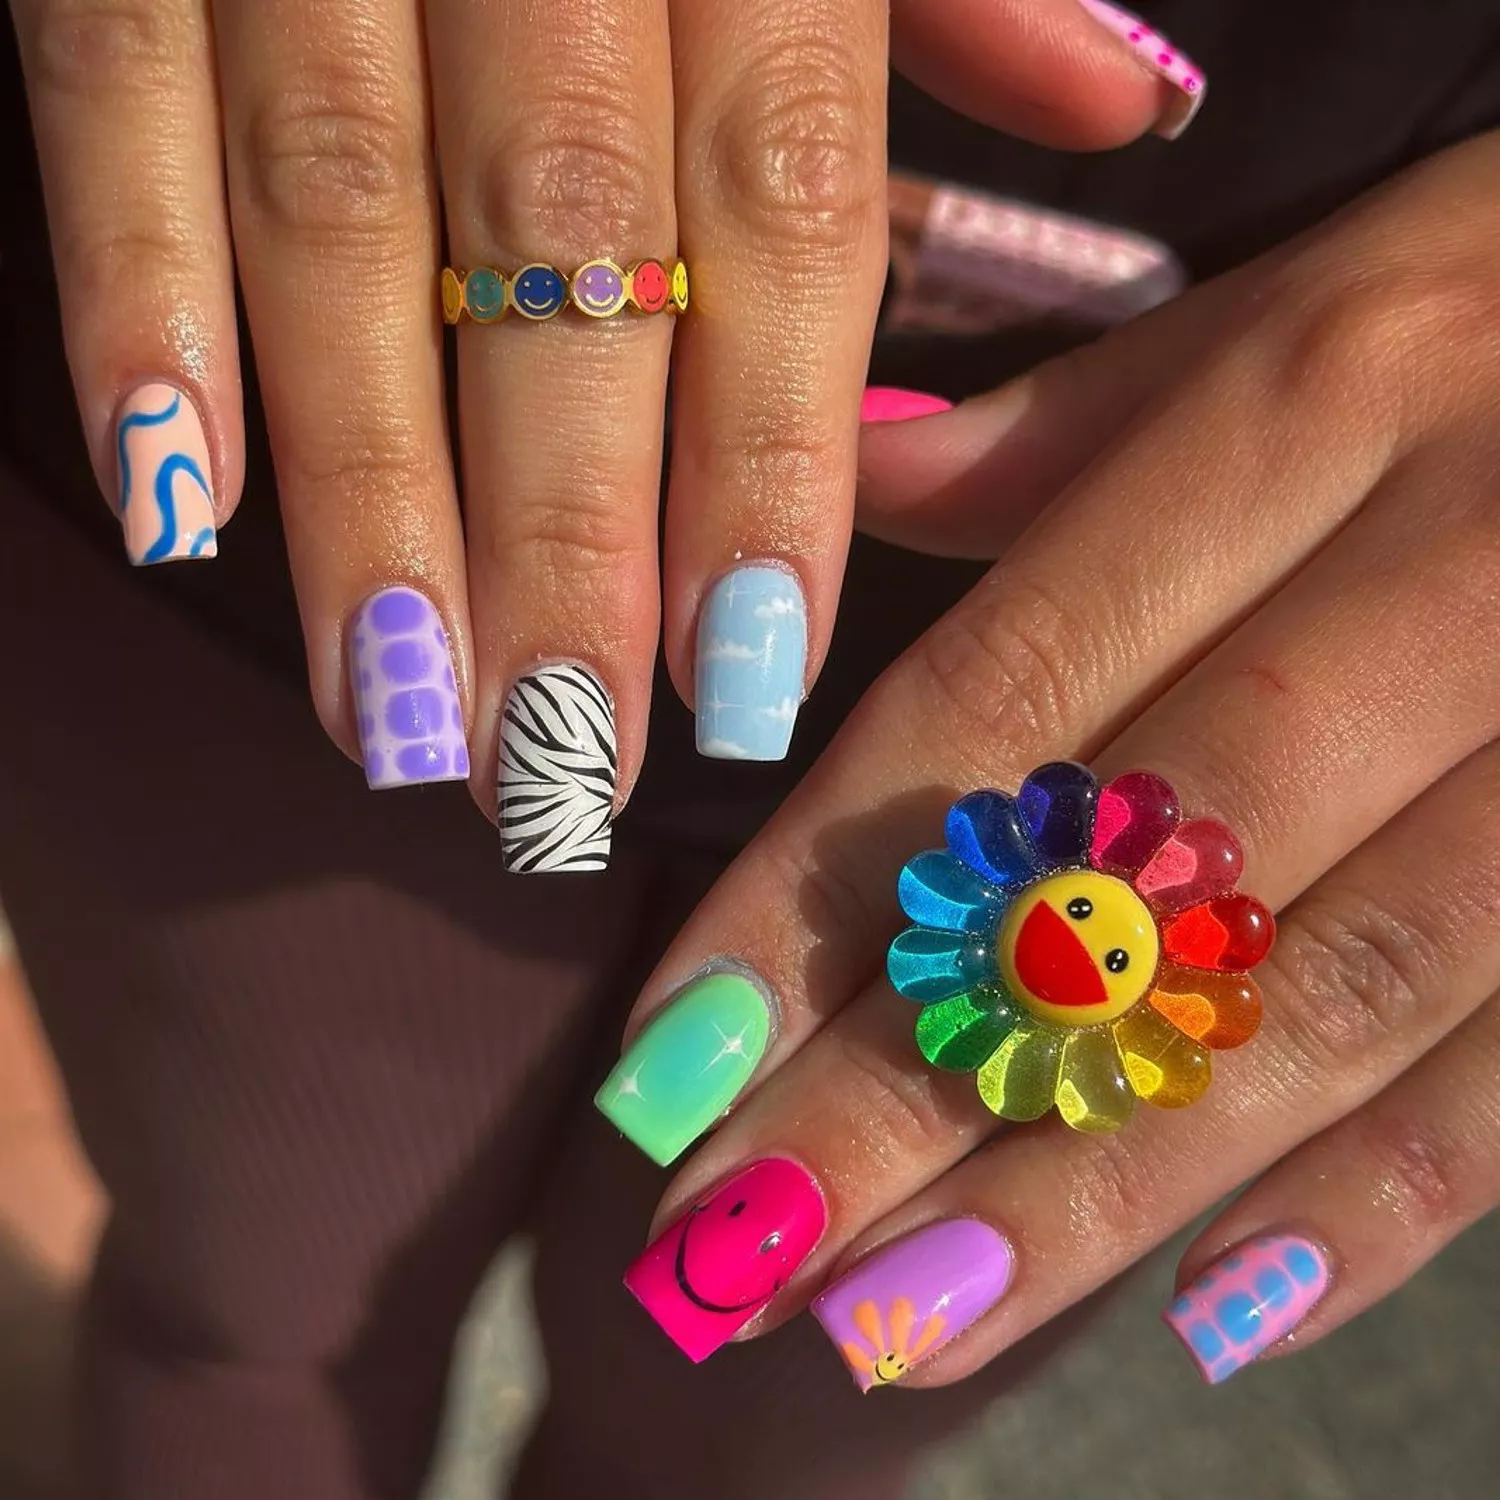 Manicure with abstract, sparkle, zebra print, smiley, cloud, and floral designs